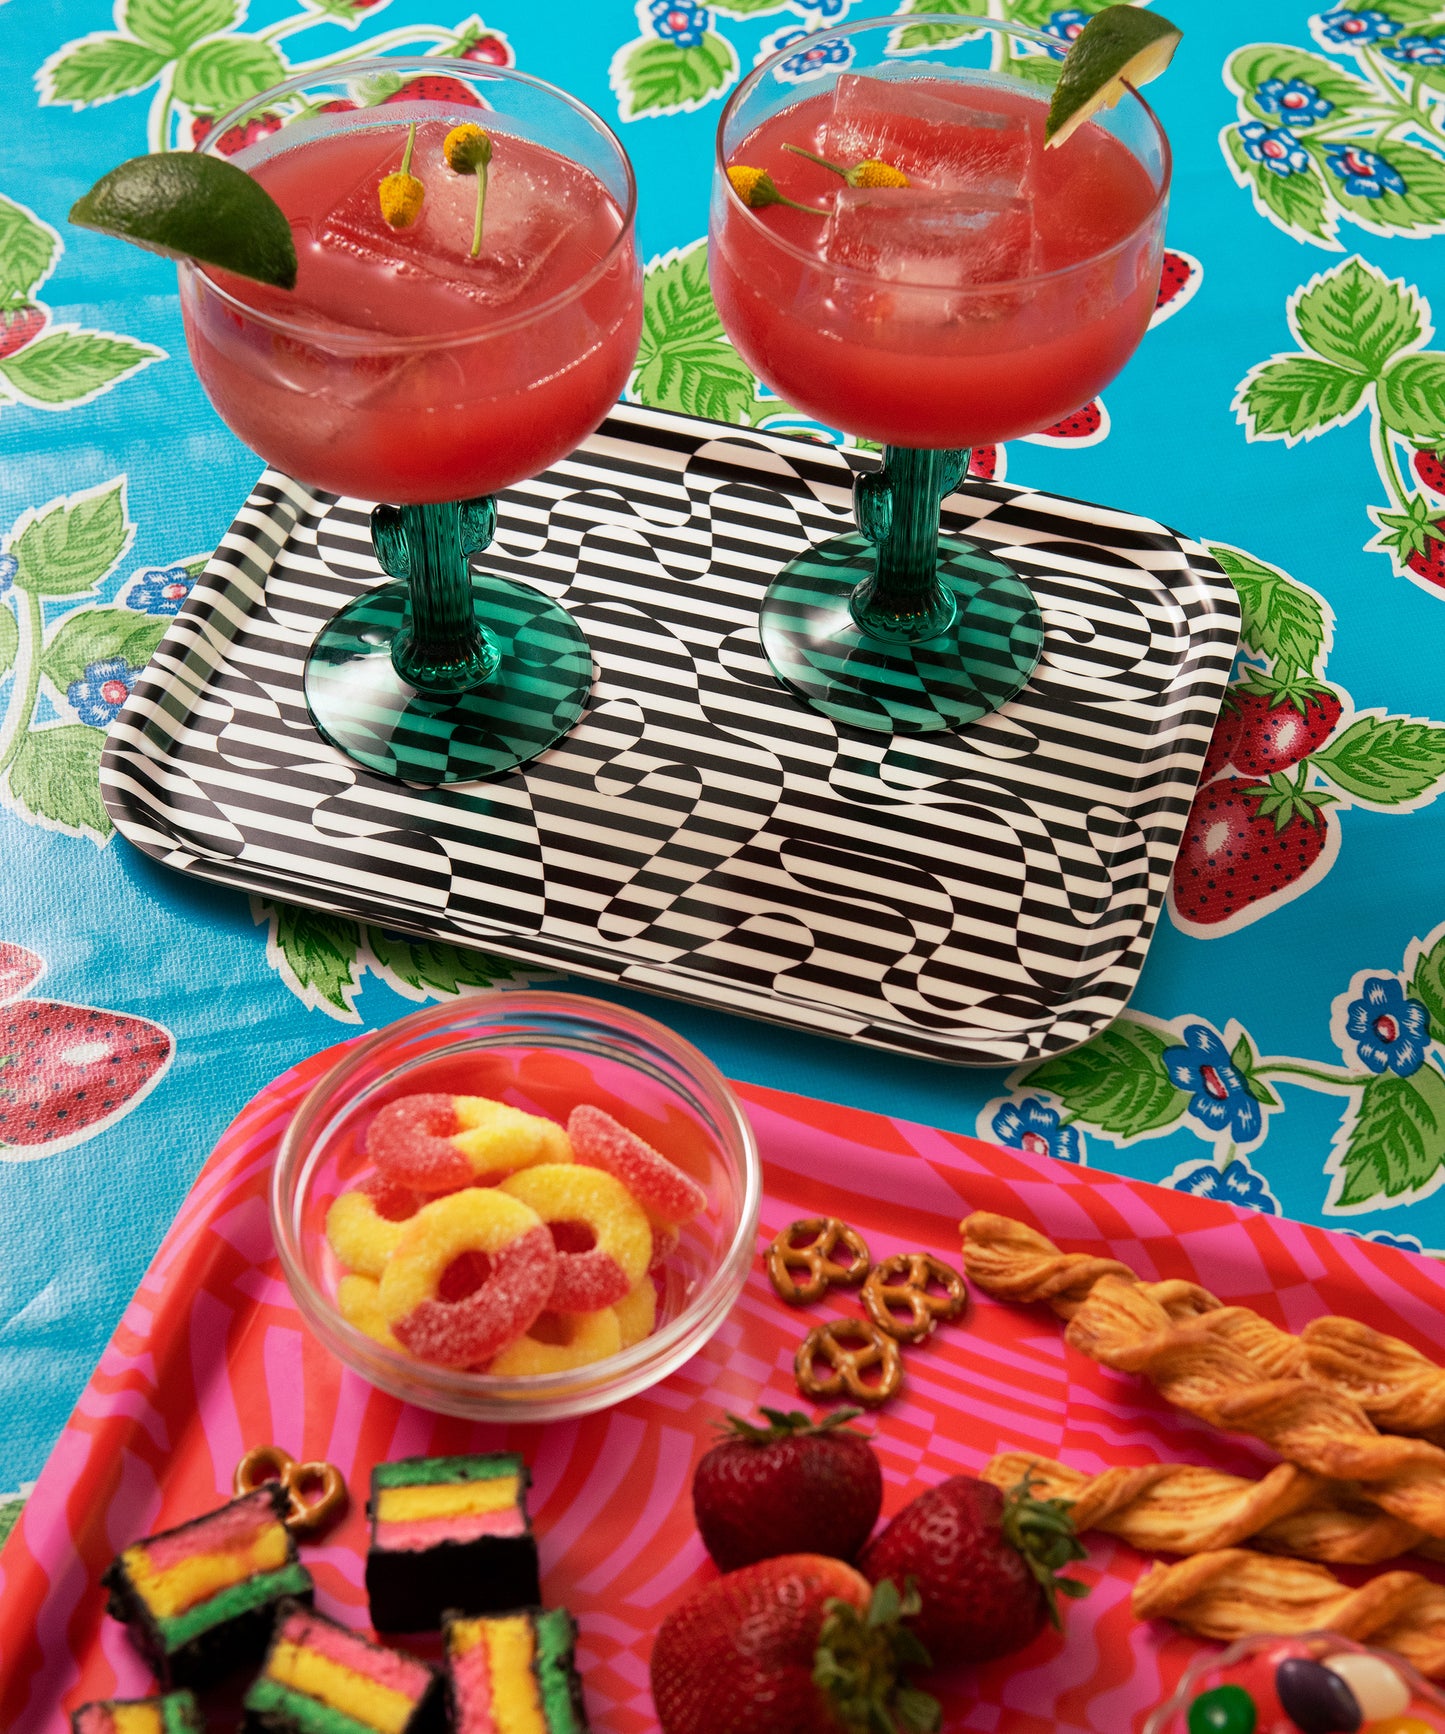 Detail of the Dazzle Tray with two margarita glasses standing on it. Next to the Dazzle Tray is the Wiggles and Waves Tray with cookies, strawberries, and peach rings.